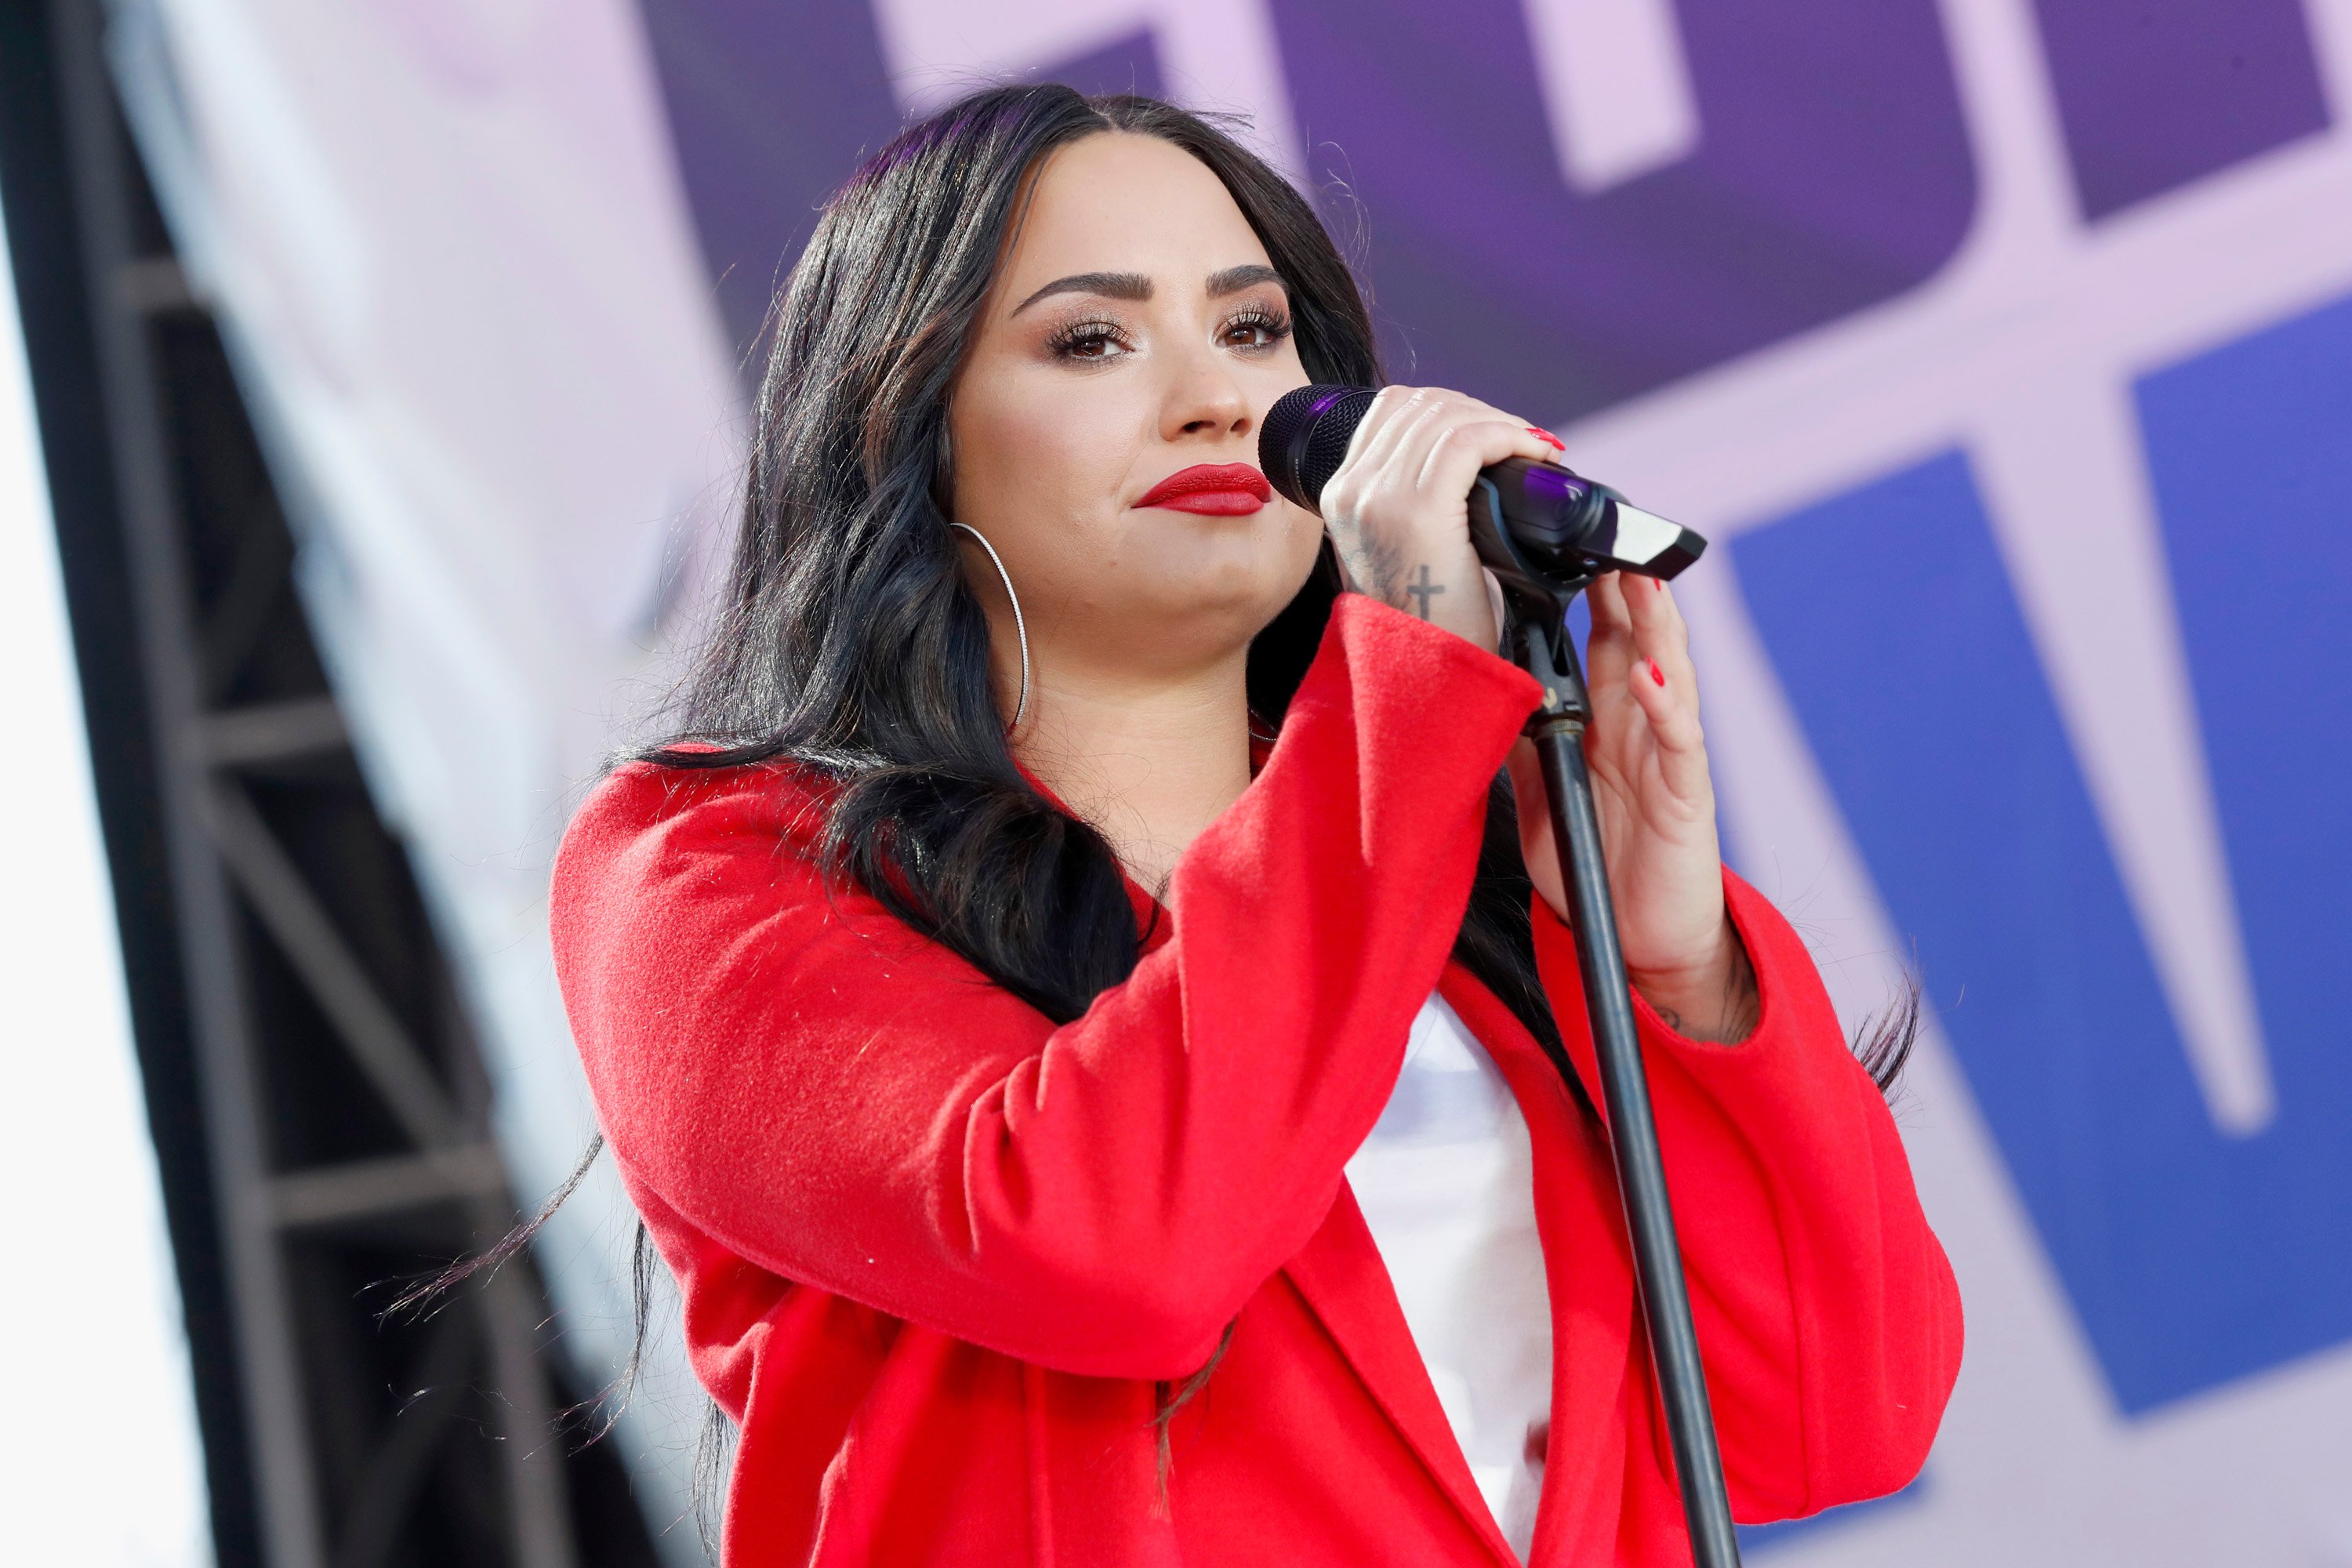 Demi Lovato performs onstage at March For Our Lives on March 24, 2018 in Washington, DC.  